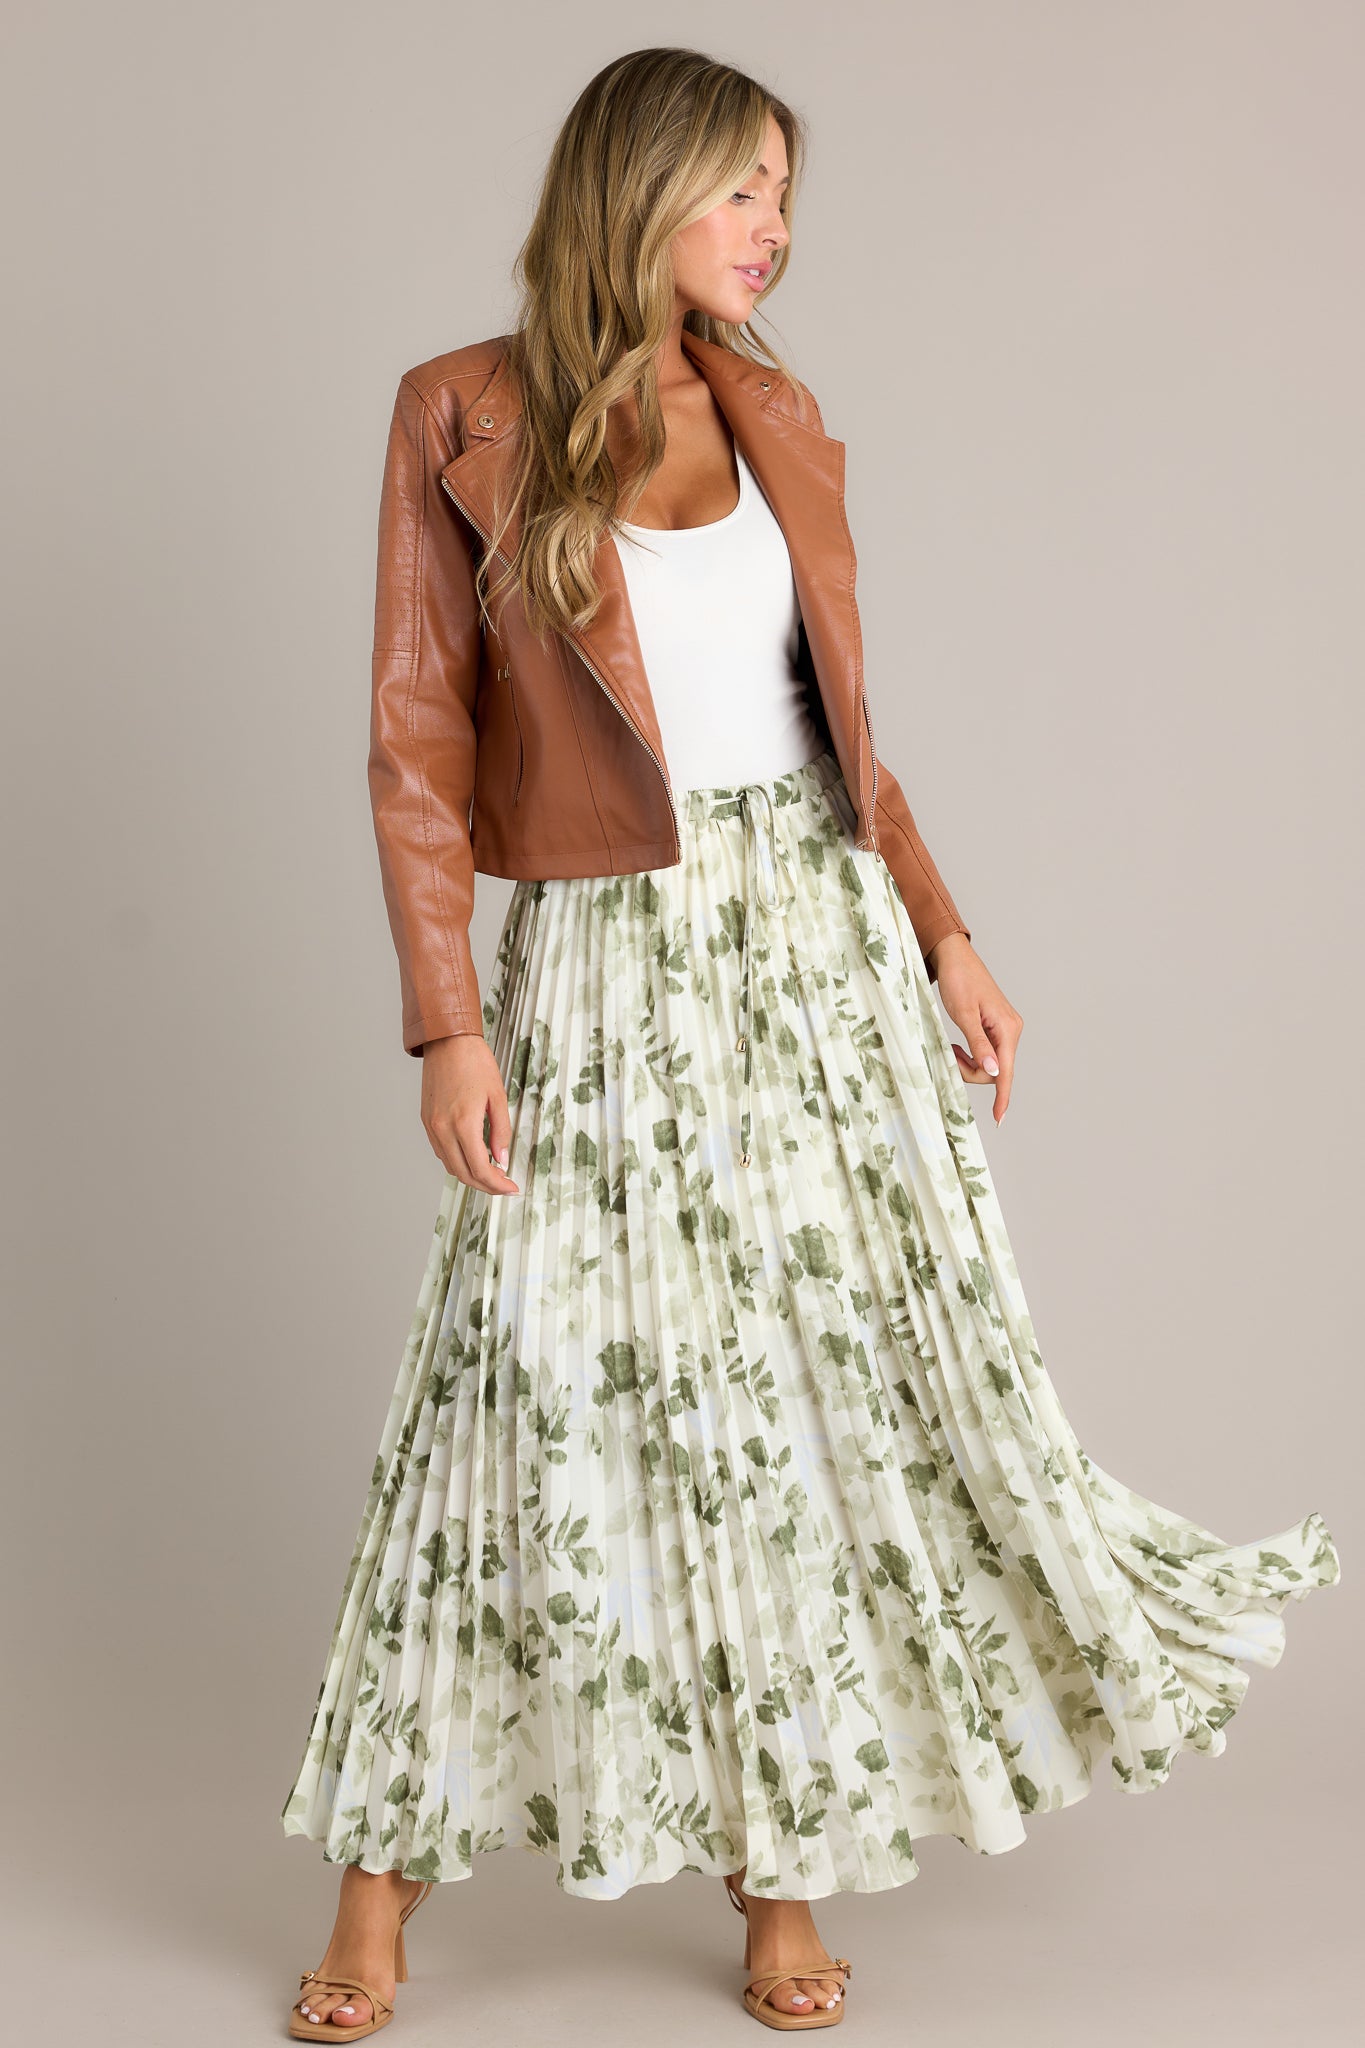 Action shot of a green skirt with a high waisted design, an elastic waistband, a self-tie drawstring with bead detailing, pleats throughout, and a flowing silhouette, highlighting the flow and movement of the skirt.